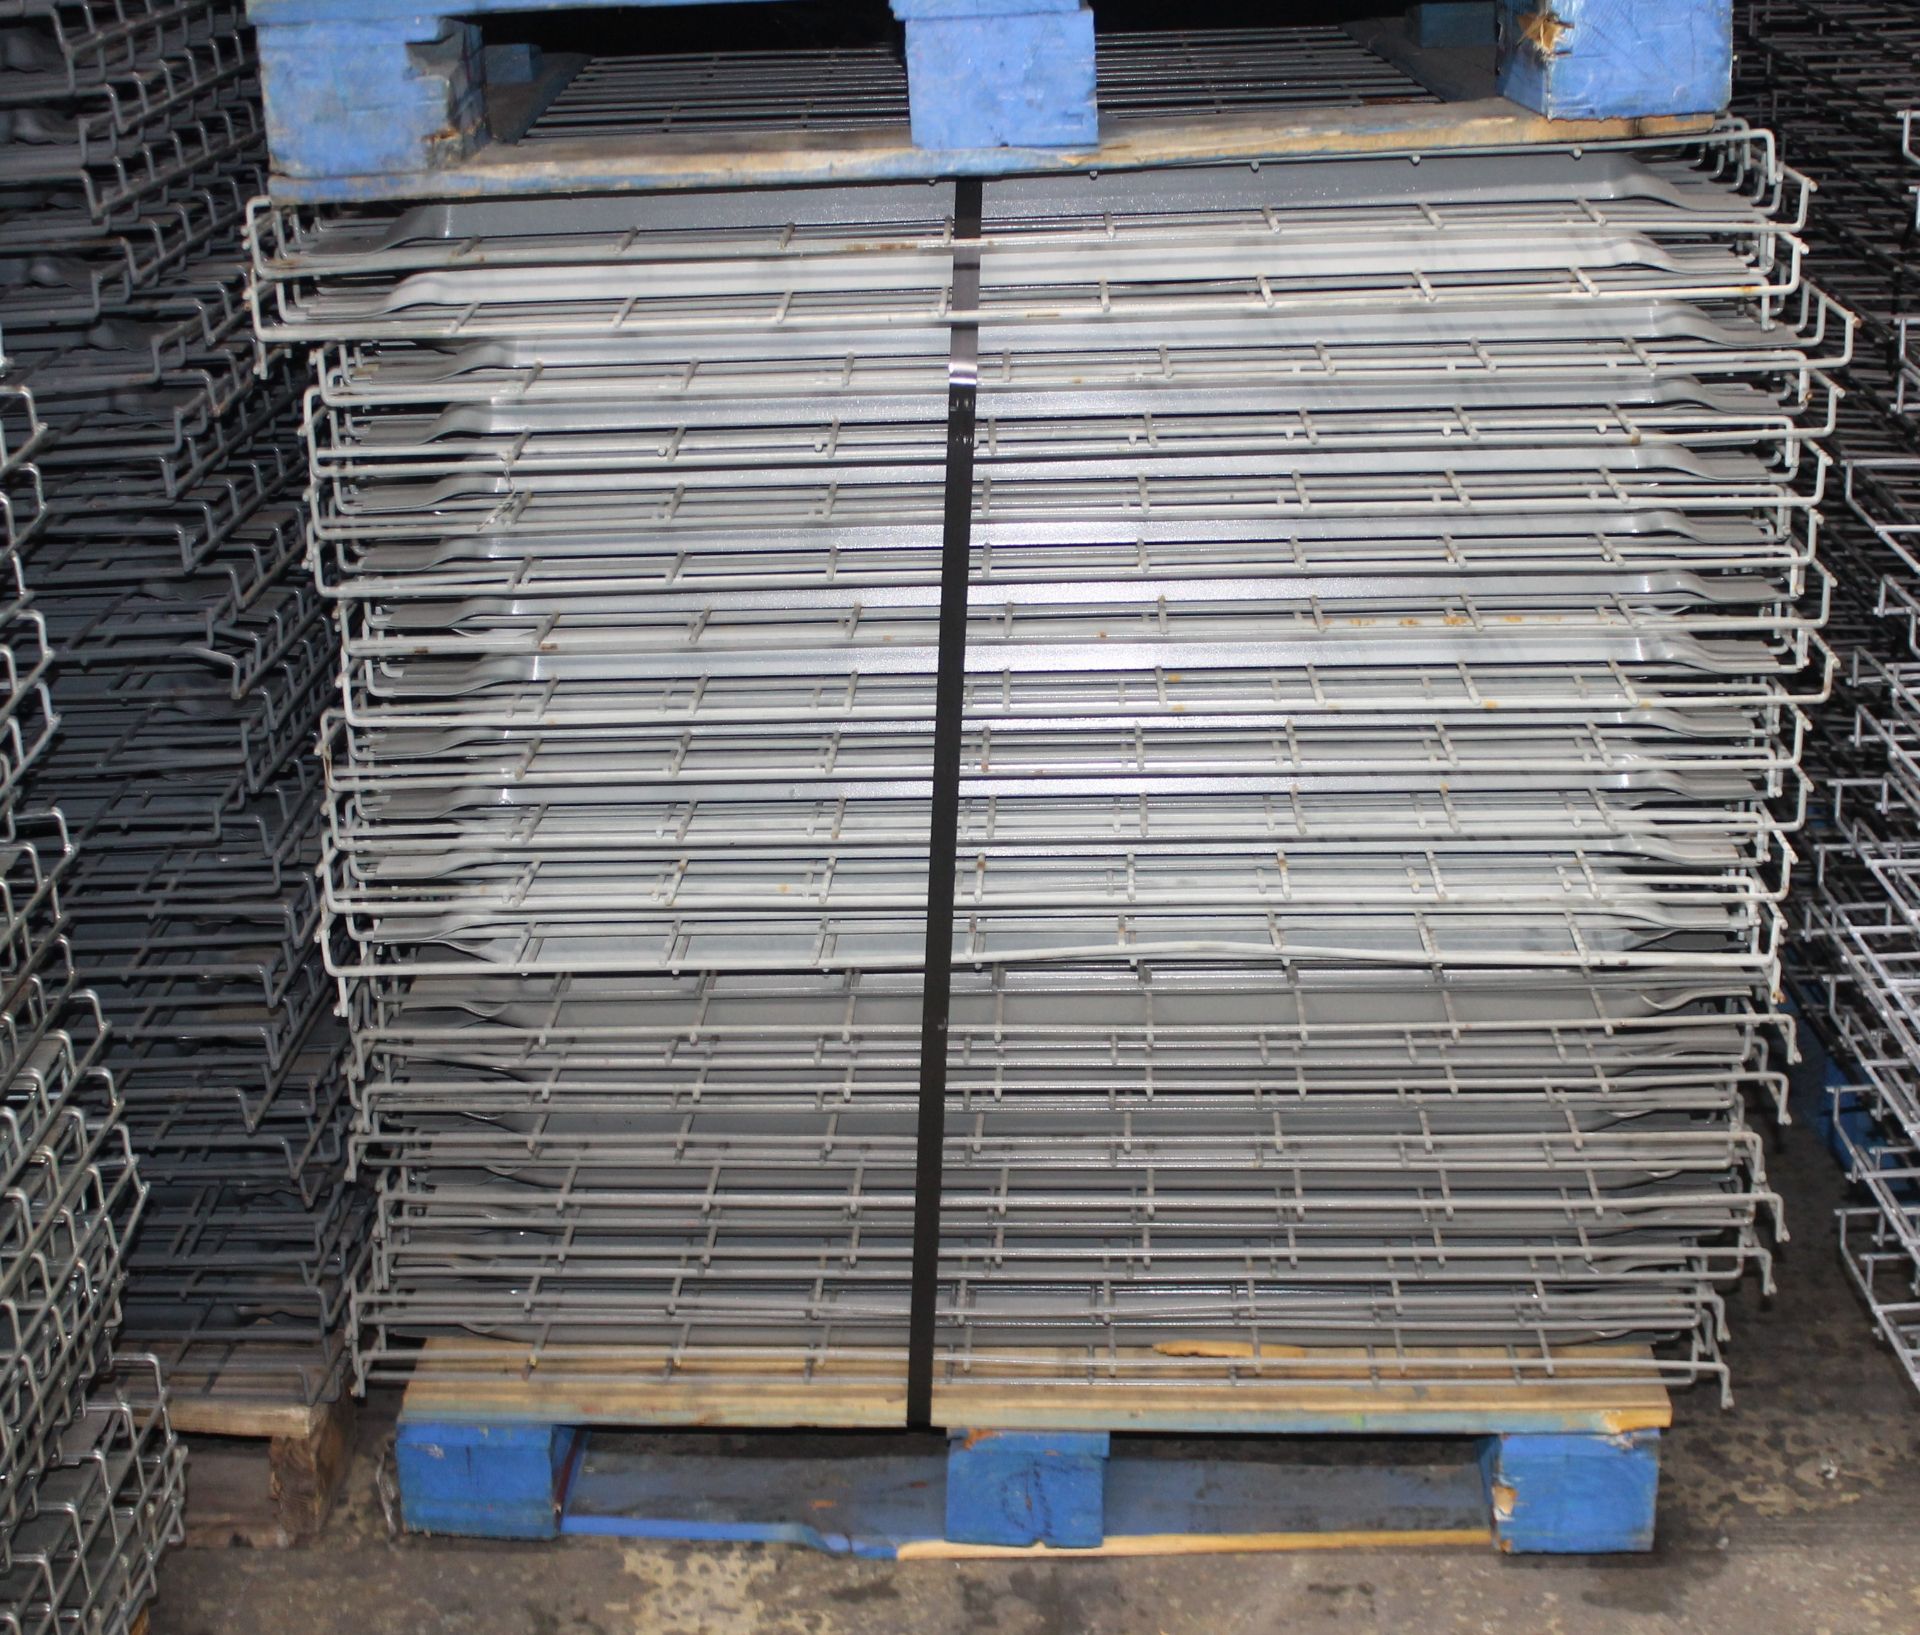 6 SECTIONS OF 146.5"H X 42"D X 99"L TEARDROP STYLE PALLET RACKS, - Image 3 of 4